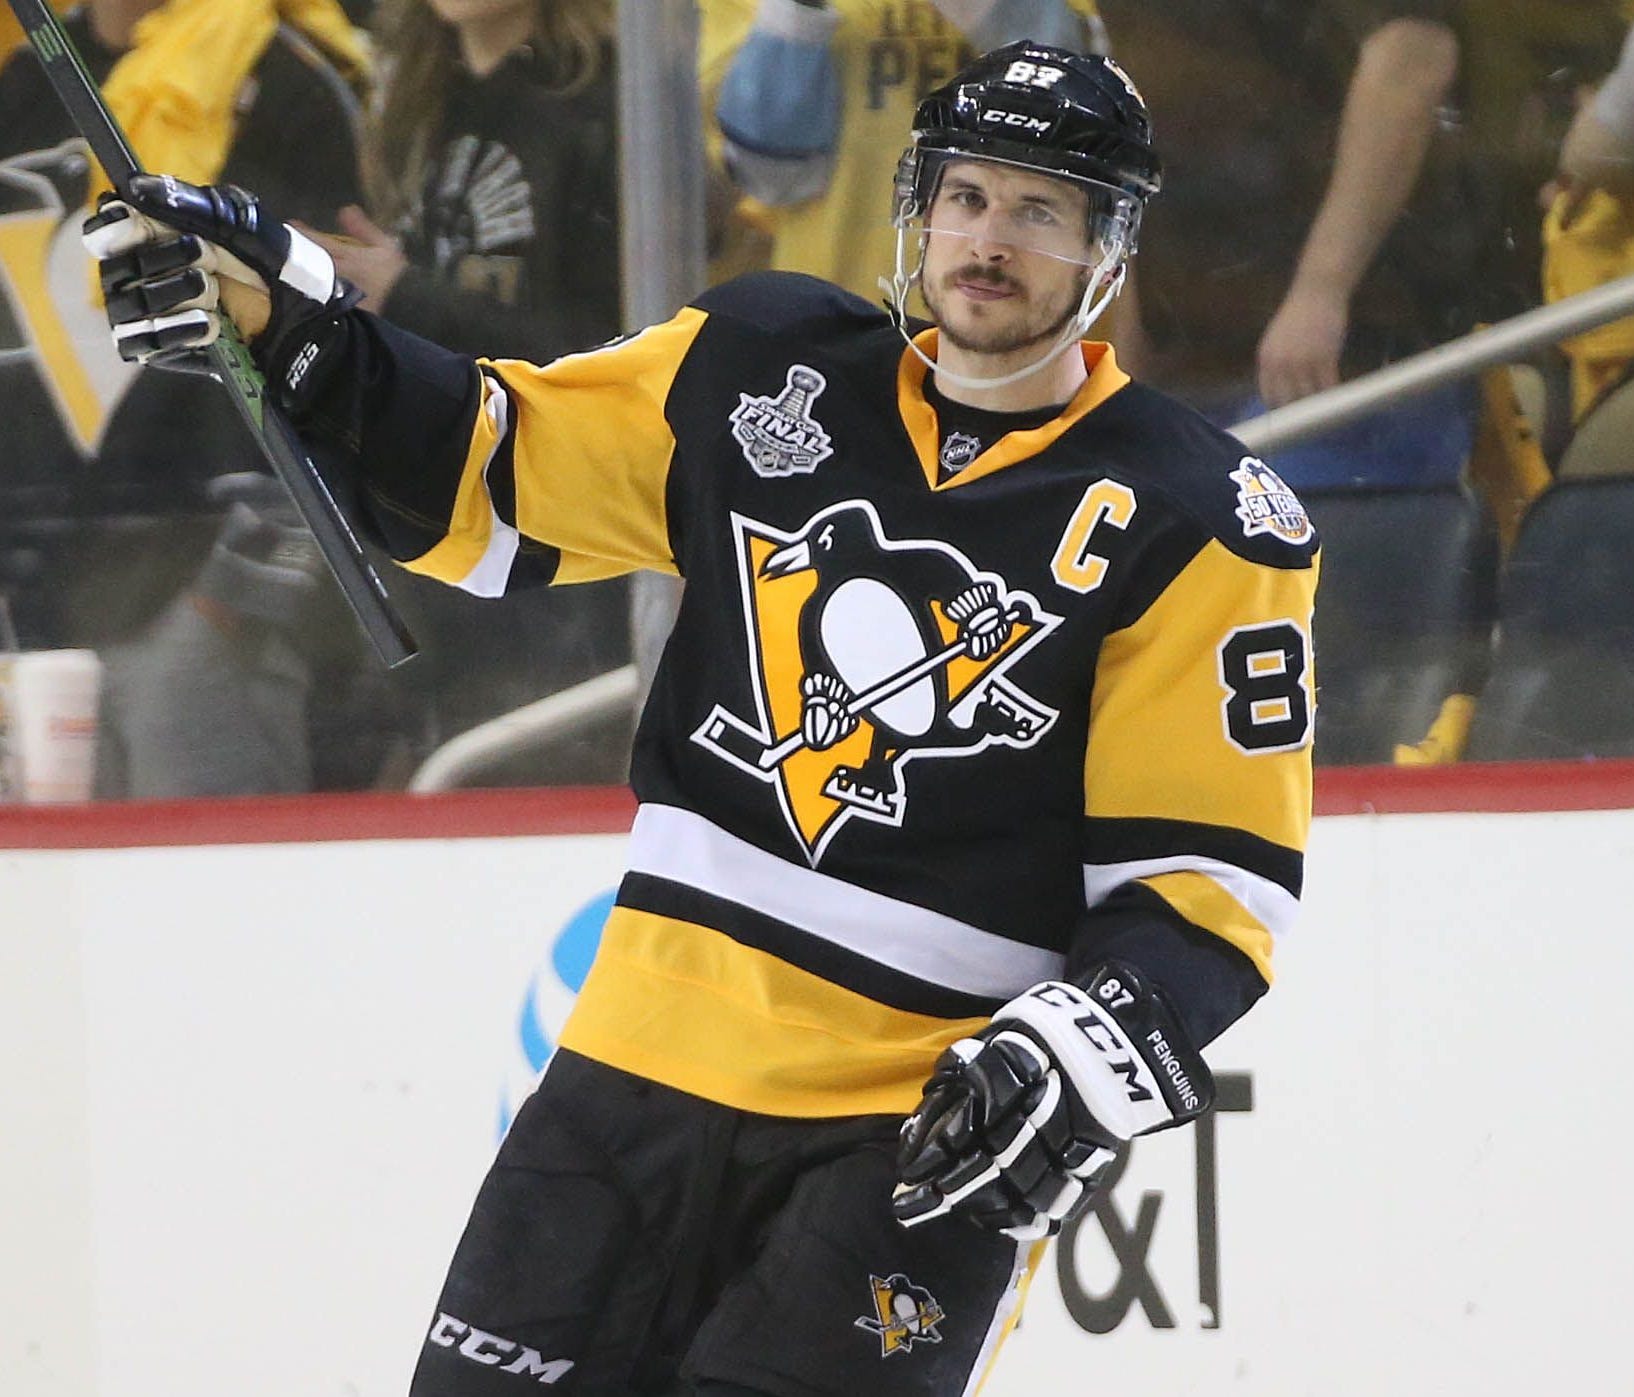 Pittsburgh Penguins center Sidney Crosby was the first start of Game 5 after notching three assists in the 6-0 win.